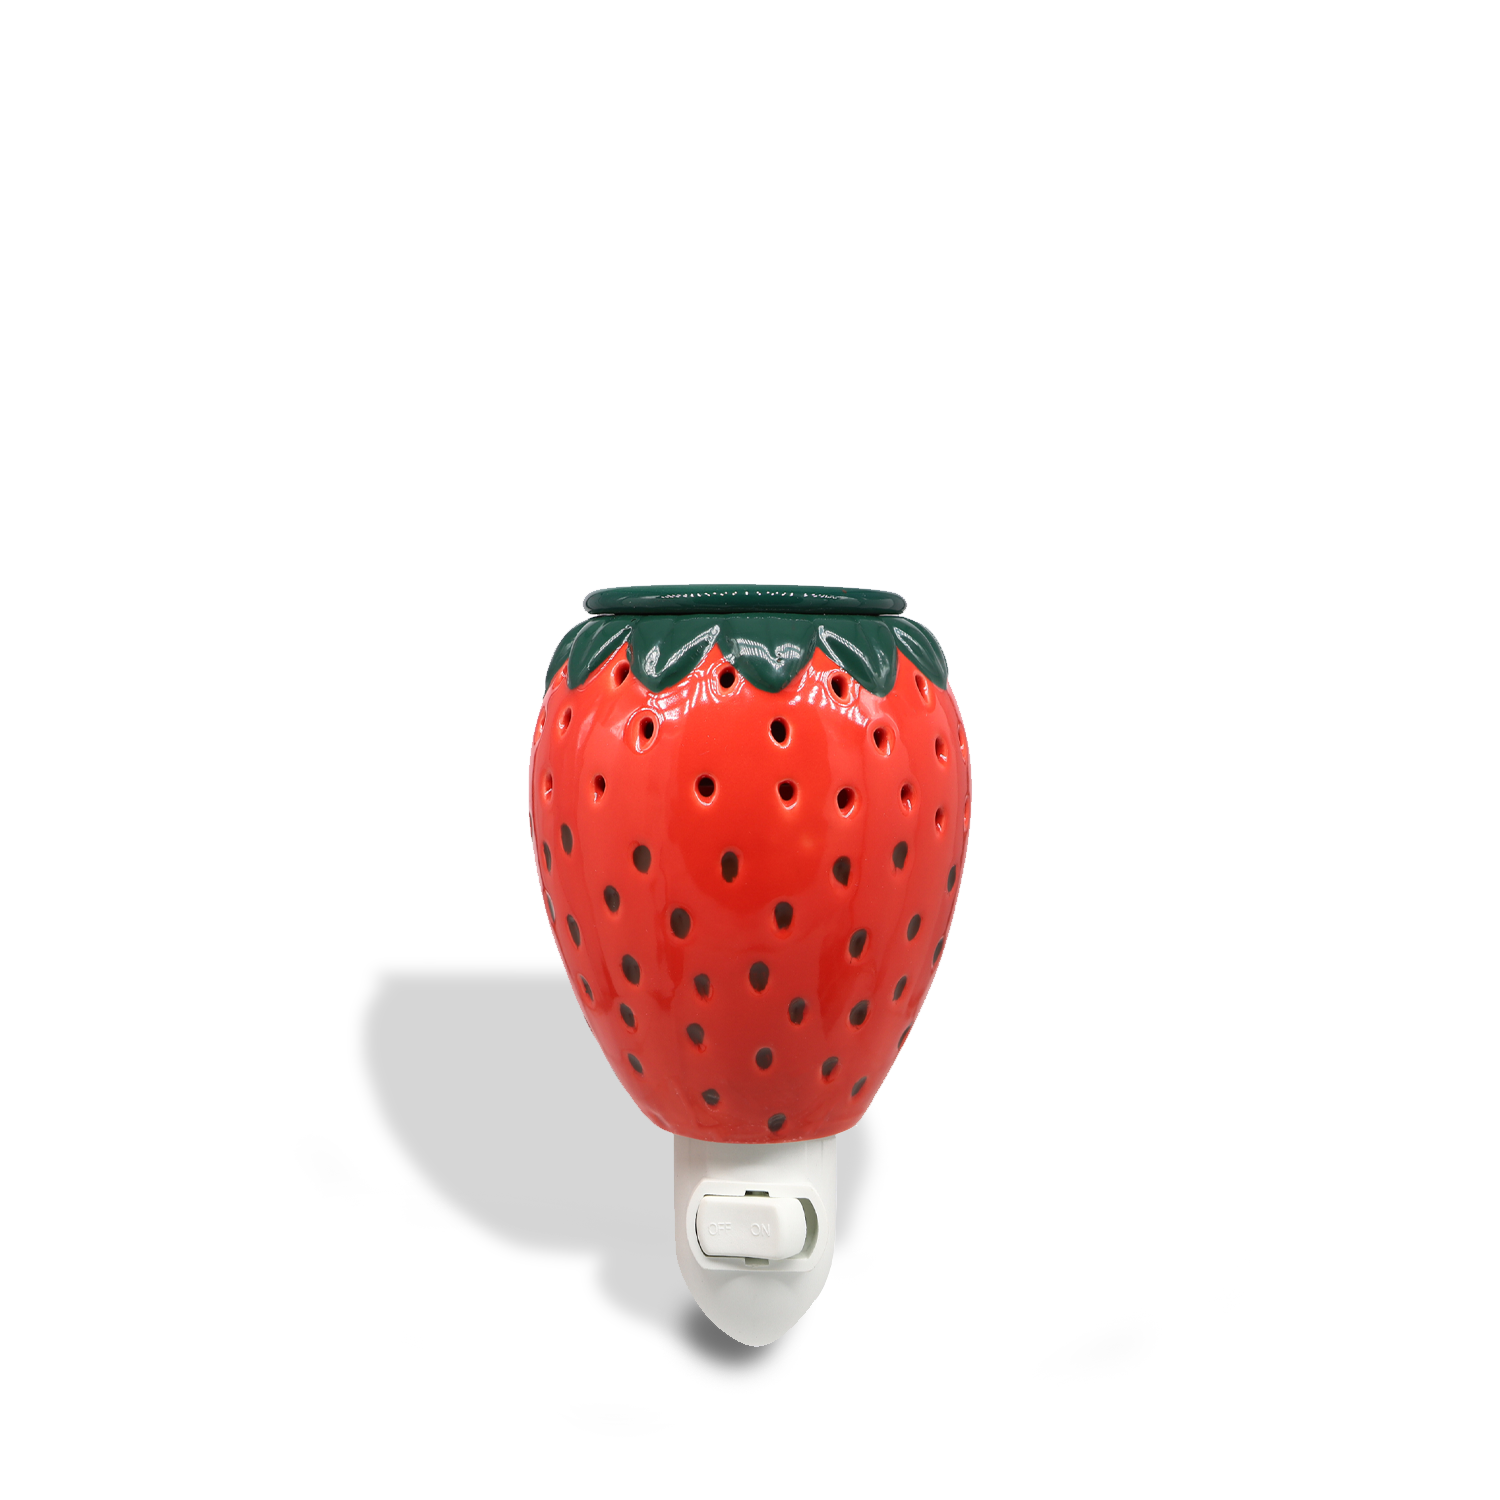 A Tuscany Candle® SEASONAL Strawberry Outlet Wax Melt Warmer plugged into a white electrical socket against a plain background.